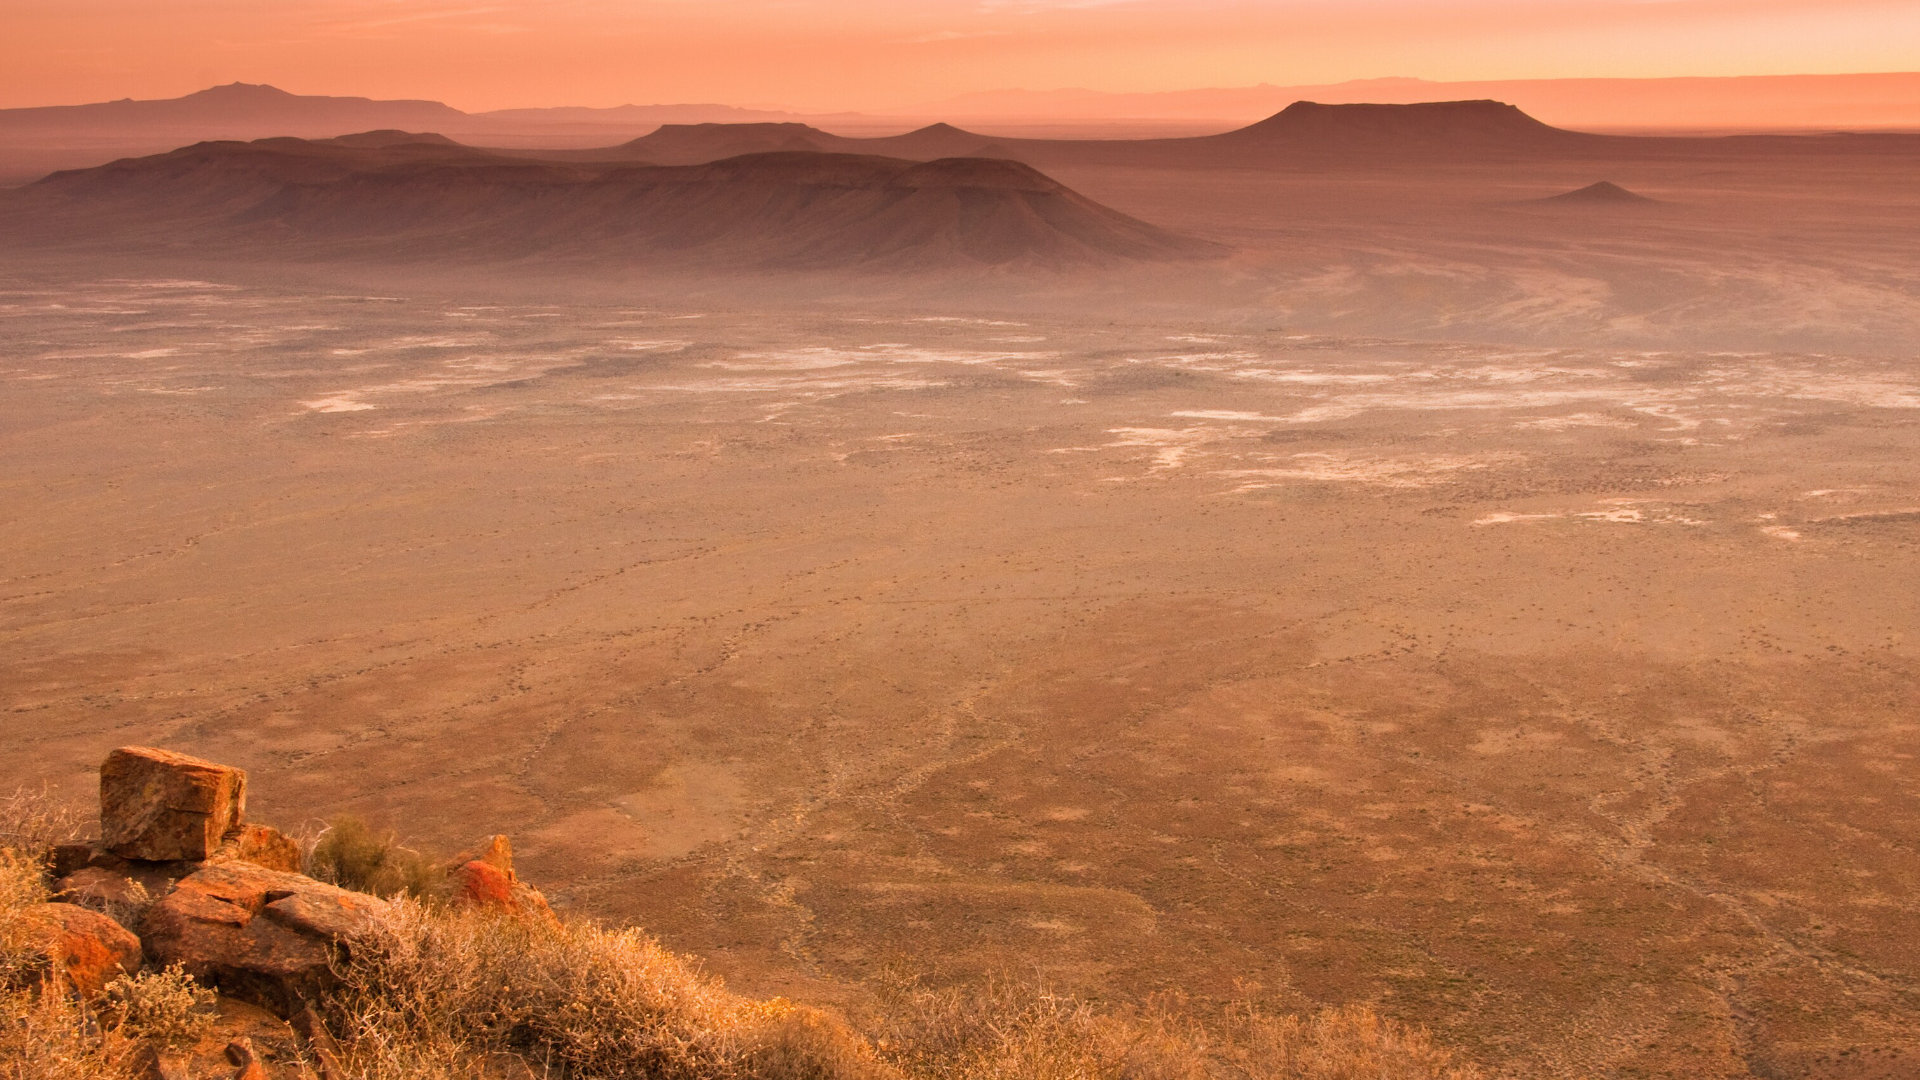 A View of The Tranquil Karoo Landscape